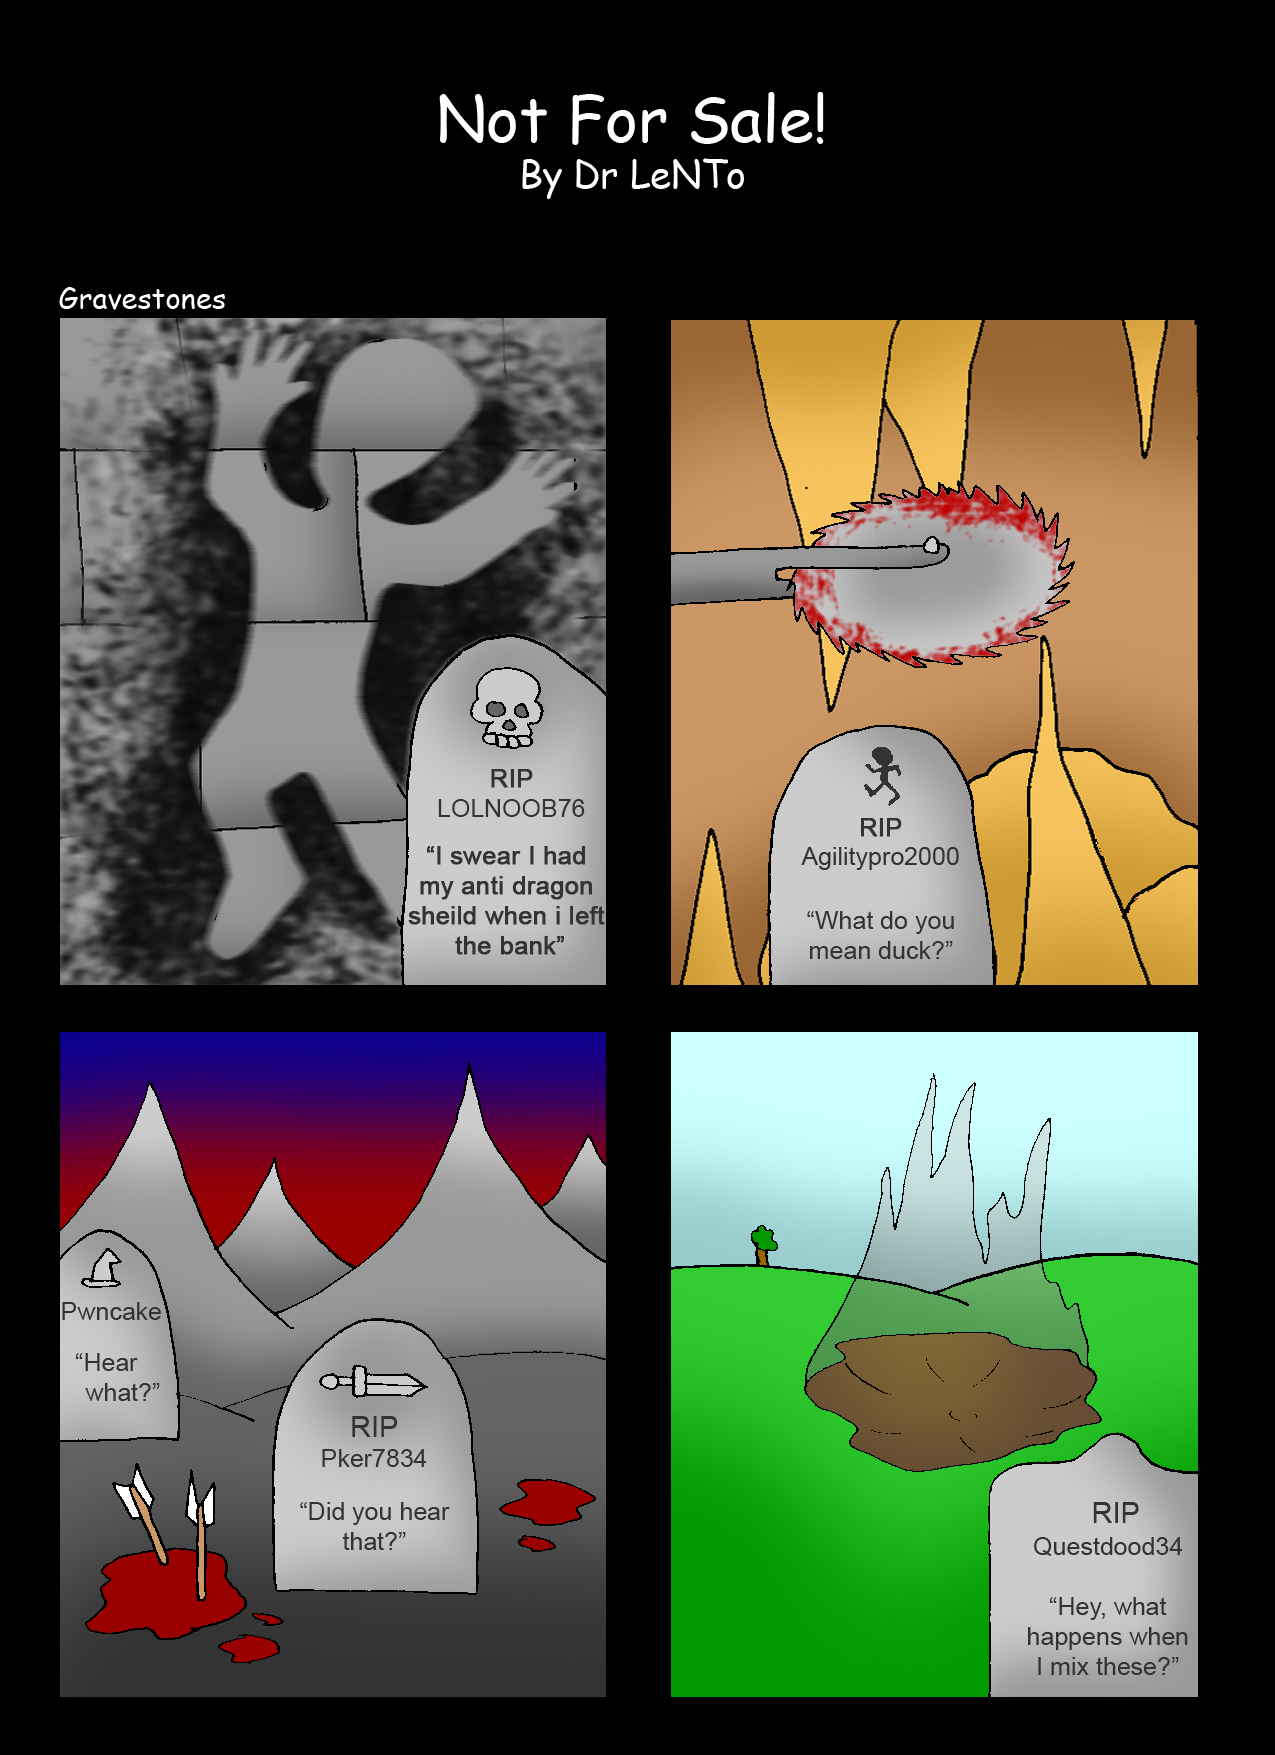 NFS___94___Gravestones_by_Dr_LeNTo.png